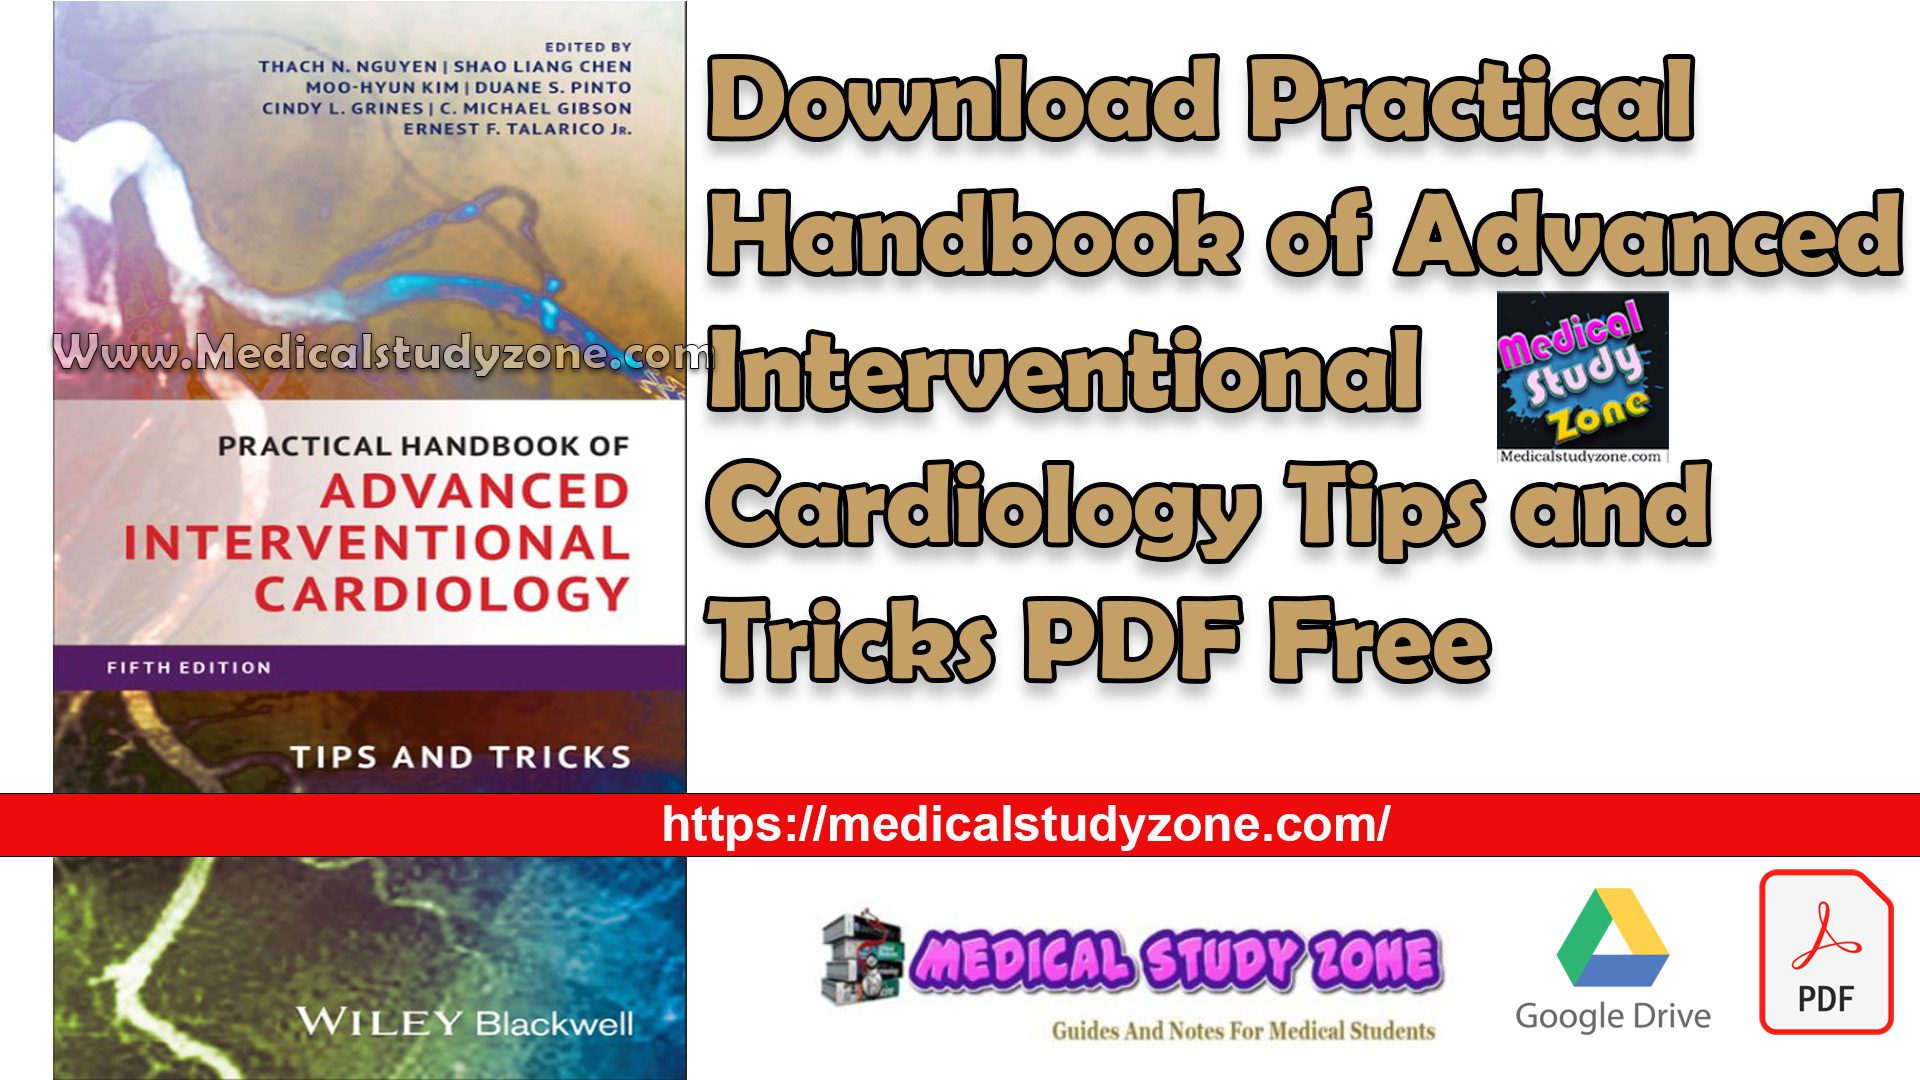 Download Practical Handbook of Advanced Interventional Cardiology Tips and Tricks PDF Free